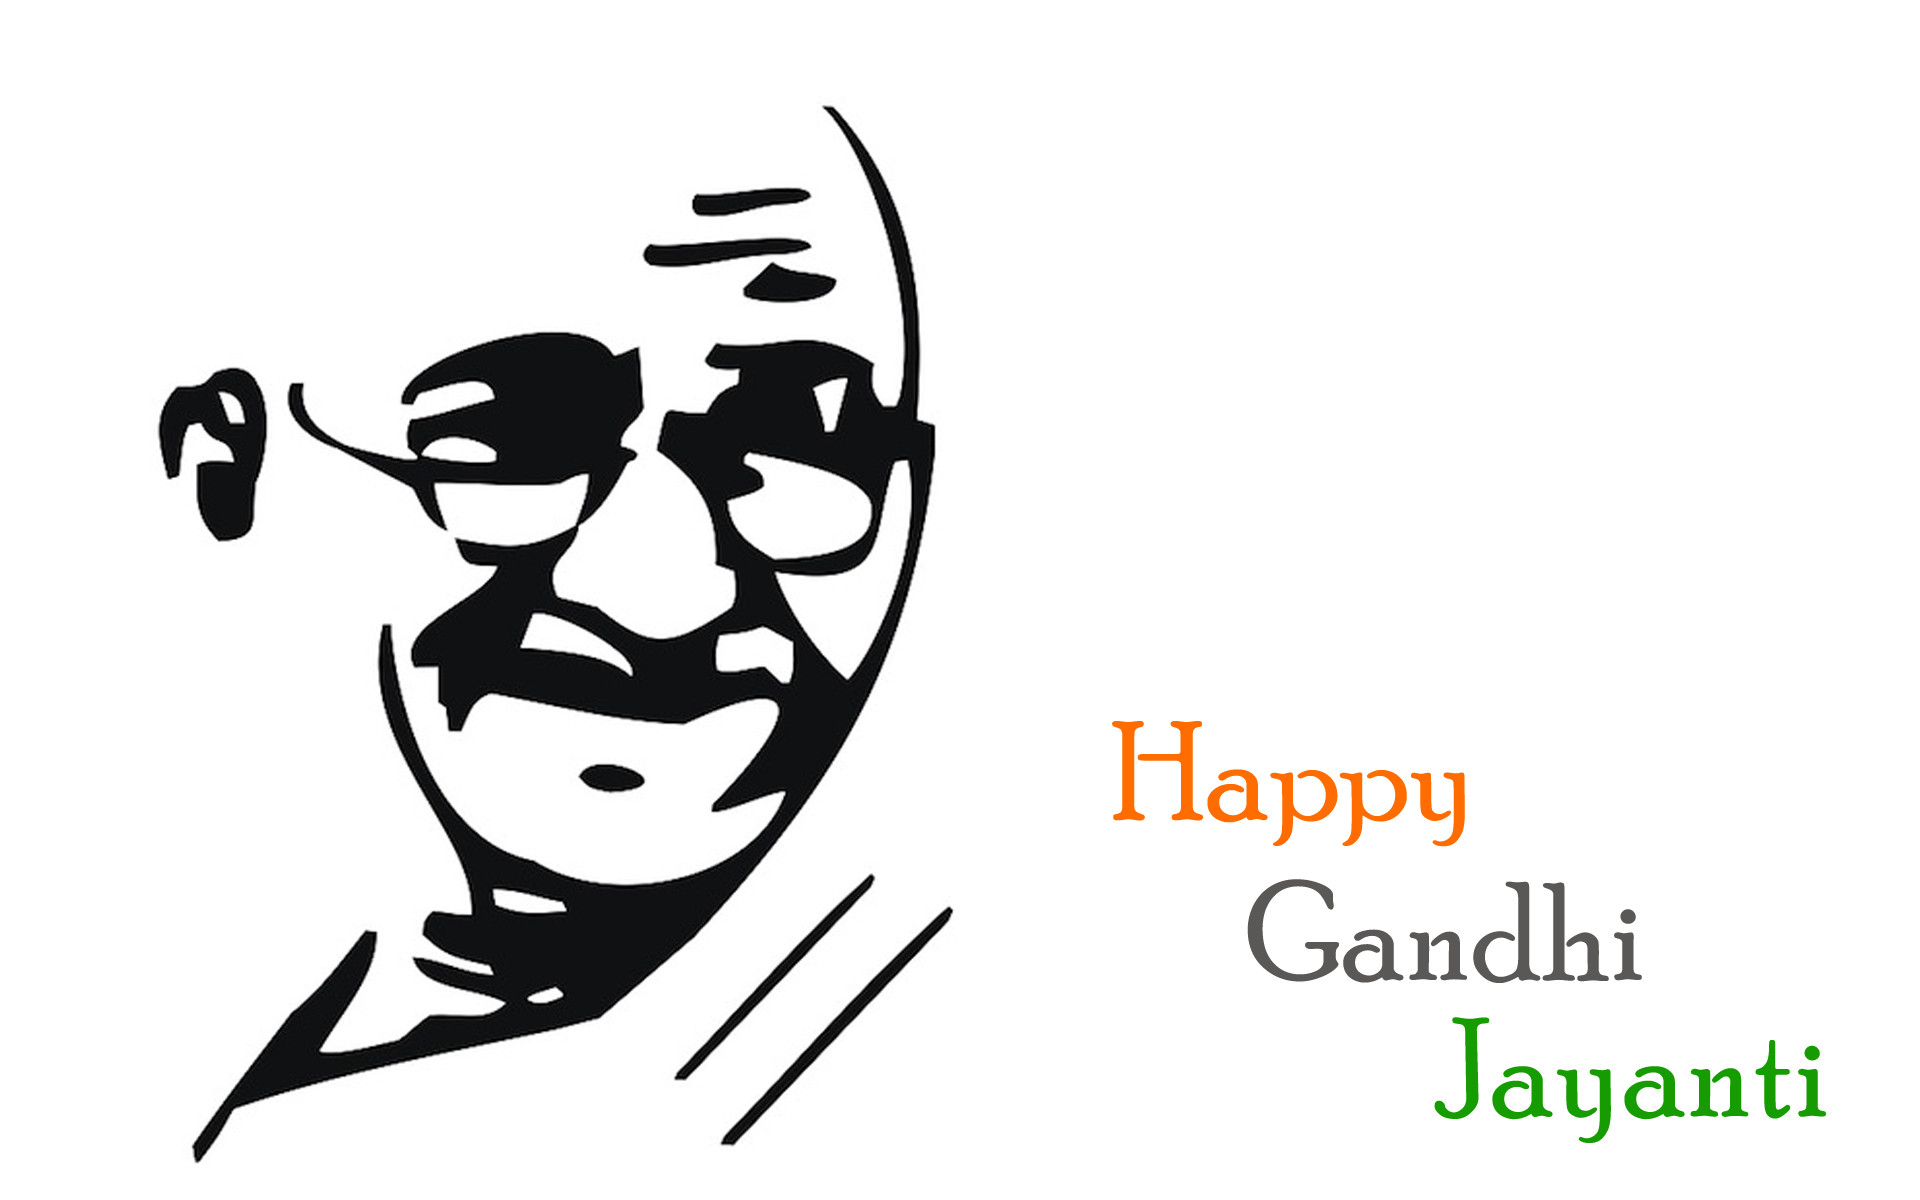 Mahatma Gandhi Wallpapers Background Pictures - Simple Living High Thinking Gandhi , HD Wallpaper & Backgrounds